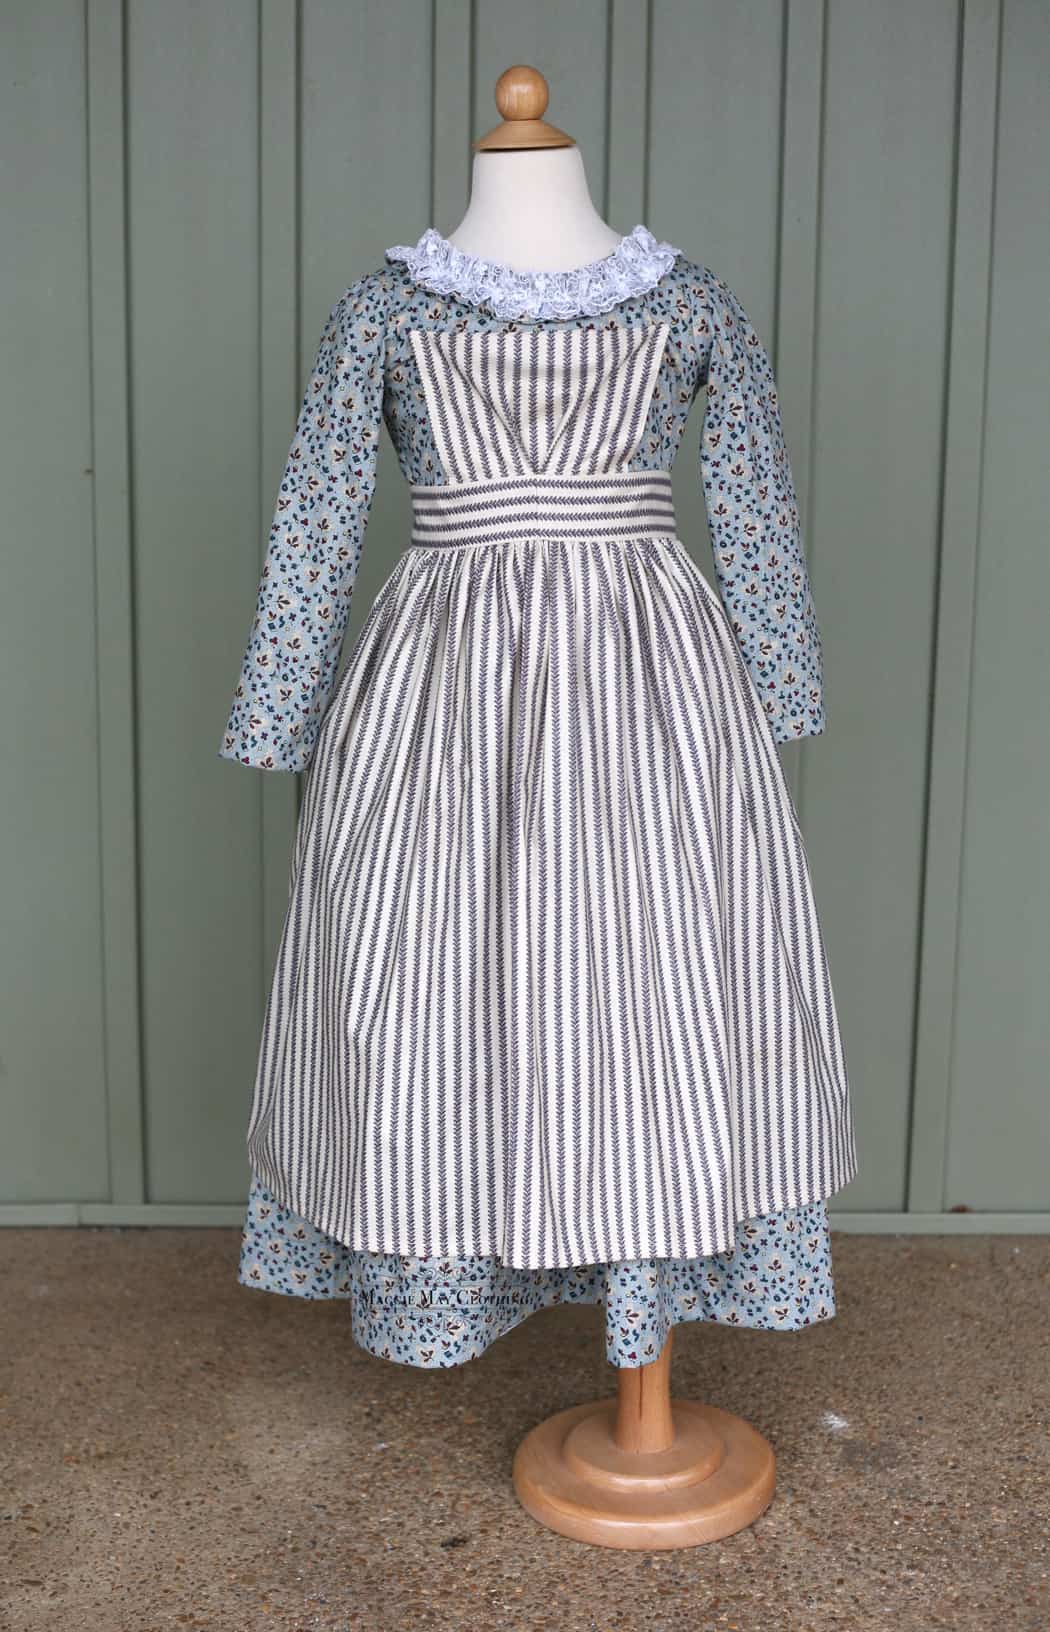 Girl's 1830s-1840s dresses – Maggie May Clothing- Fine Historical